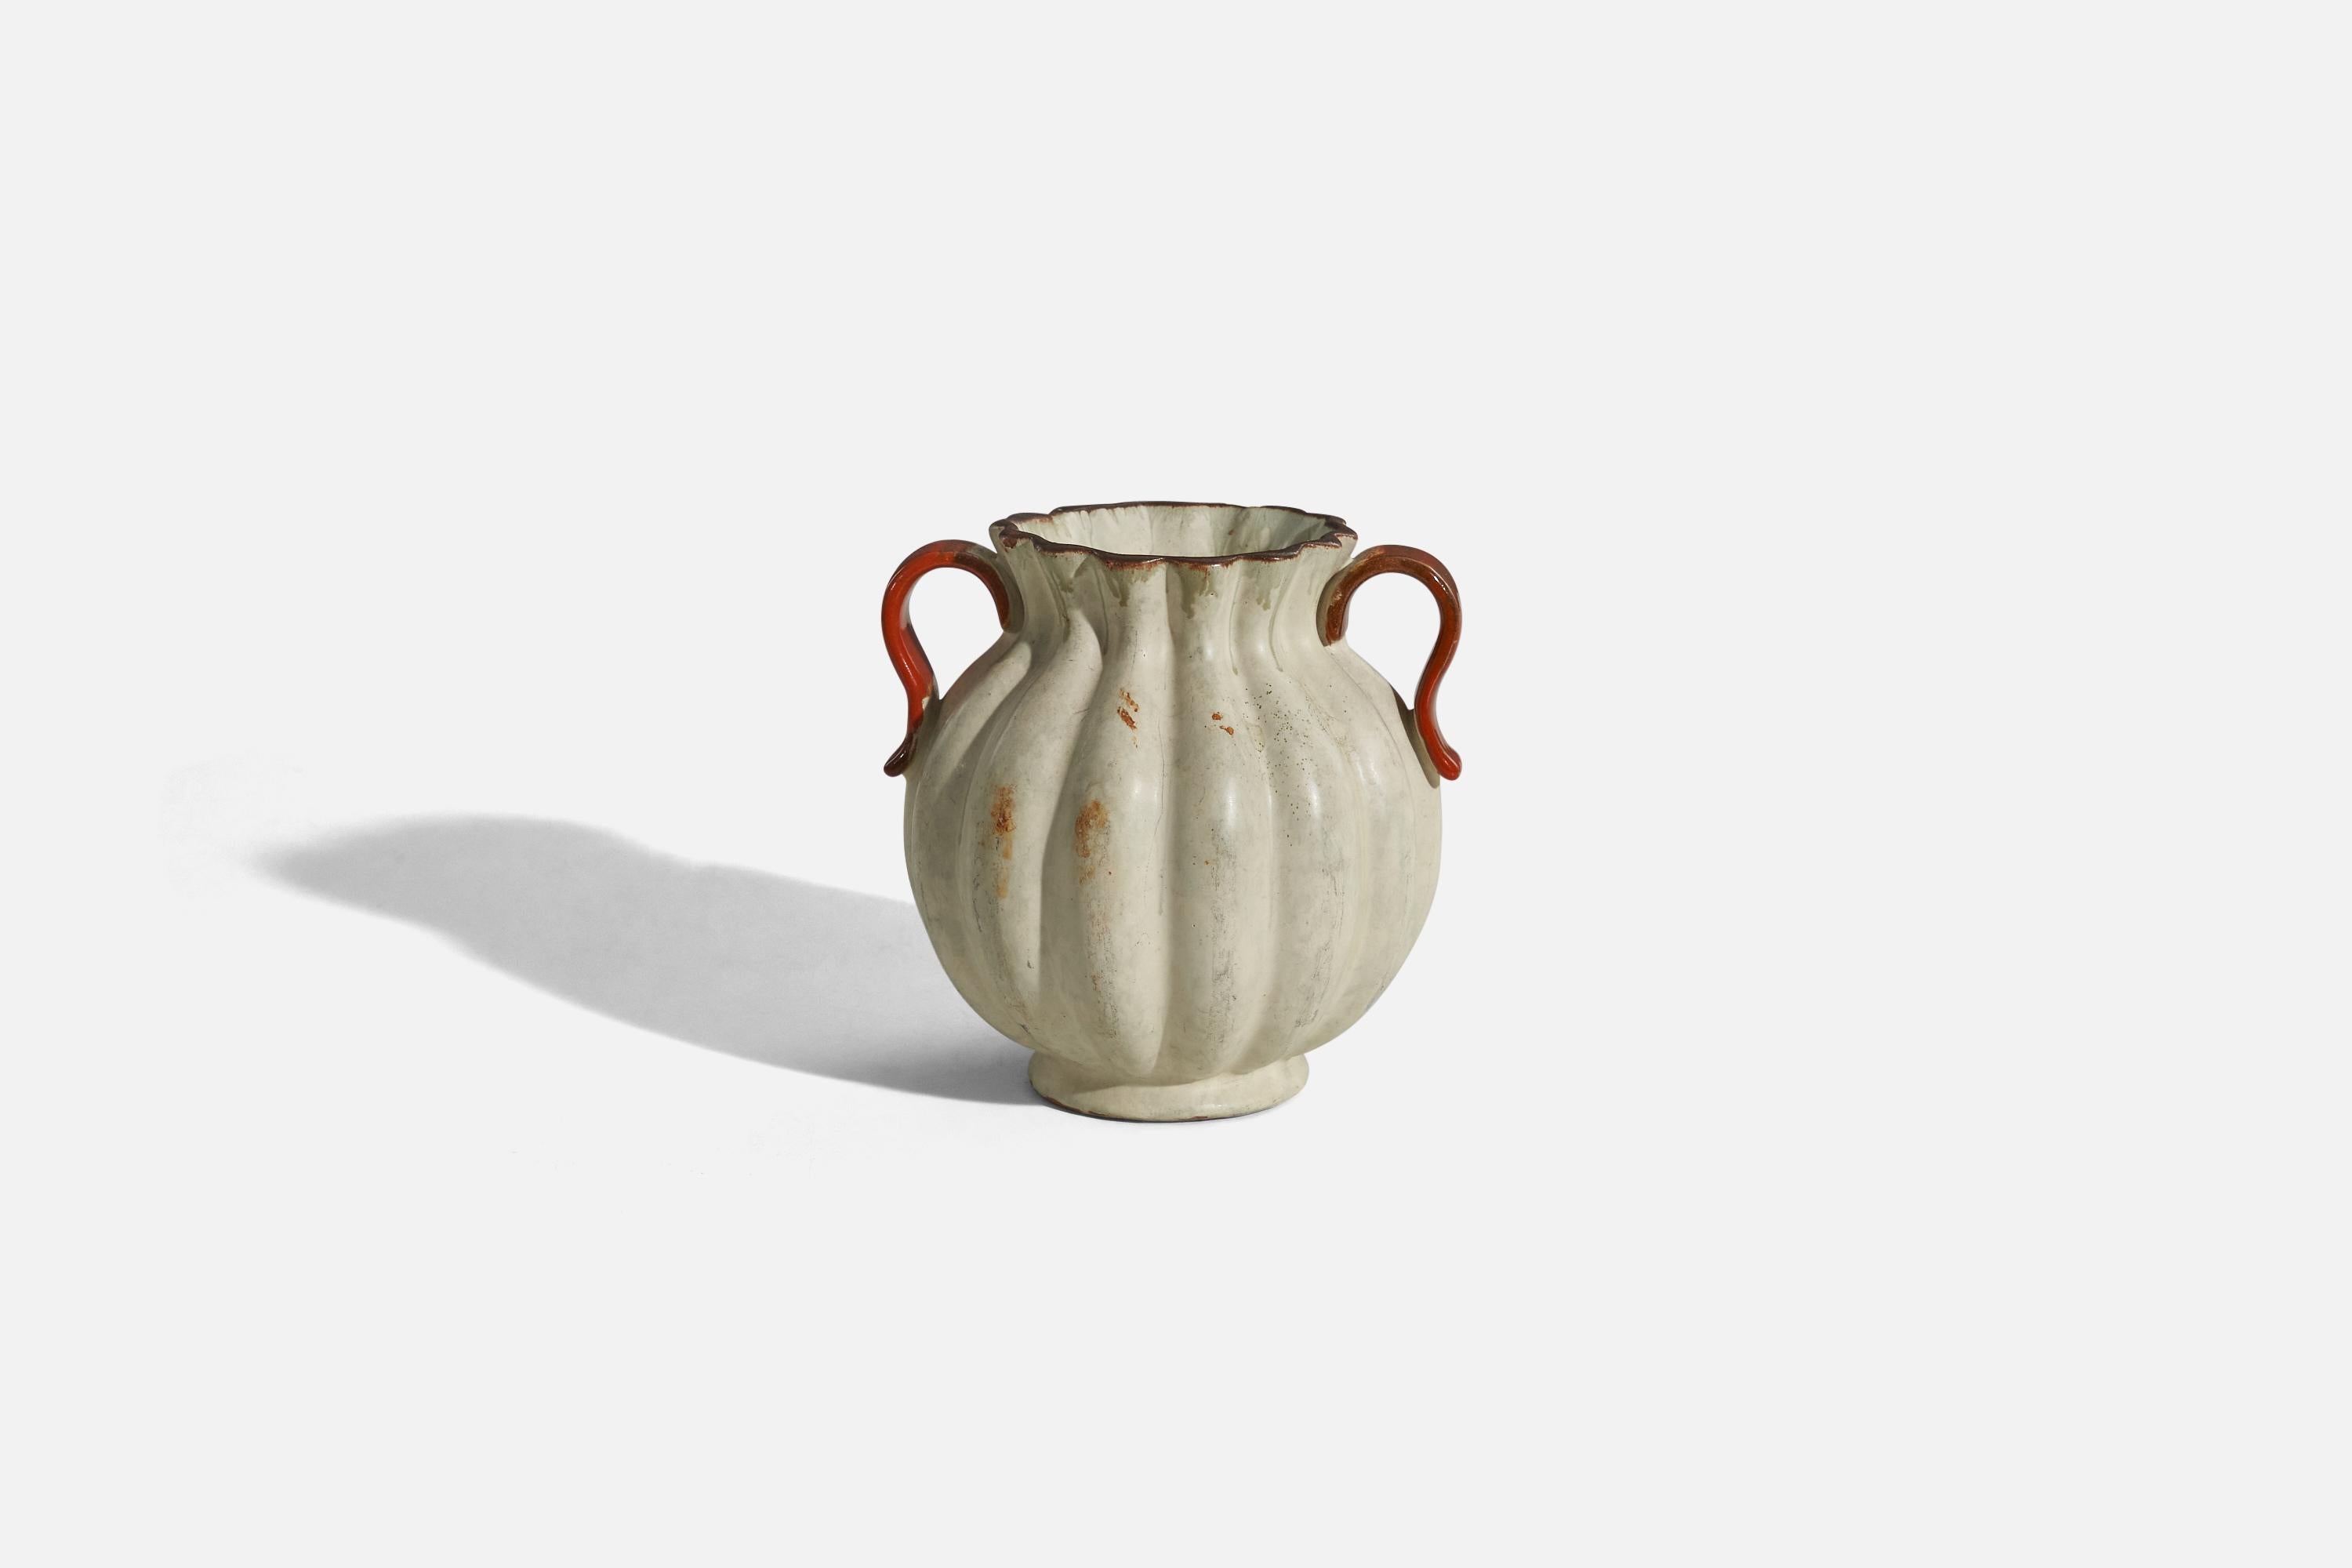 A beige and red glazed earthenware vase designed and produced by Upsala-Ekeby, Sweden, 1940s.

